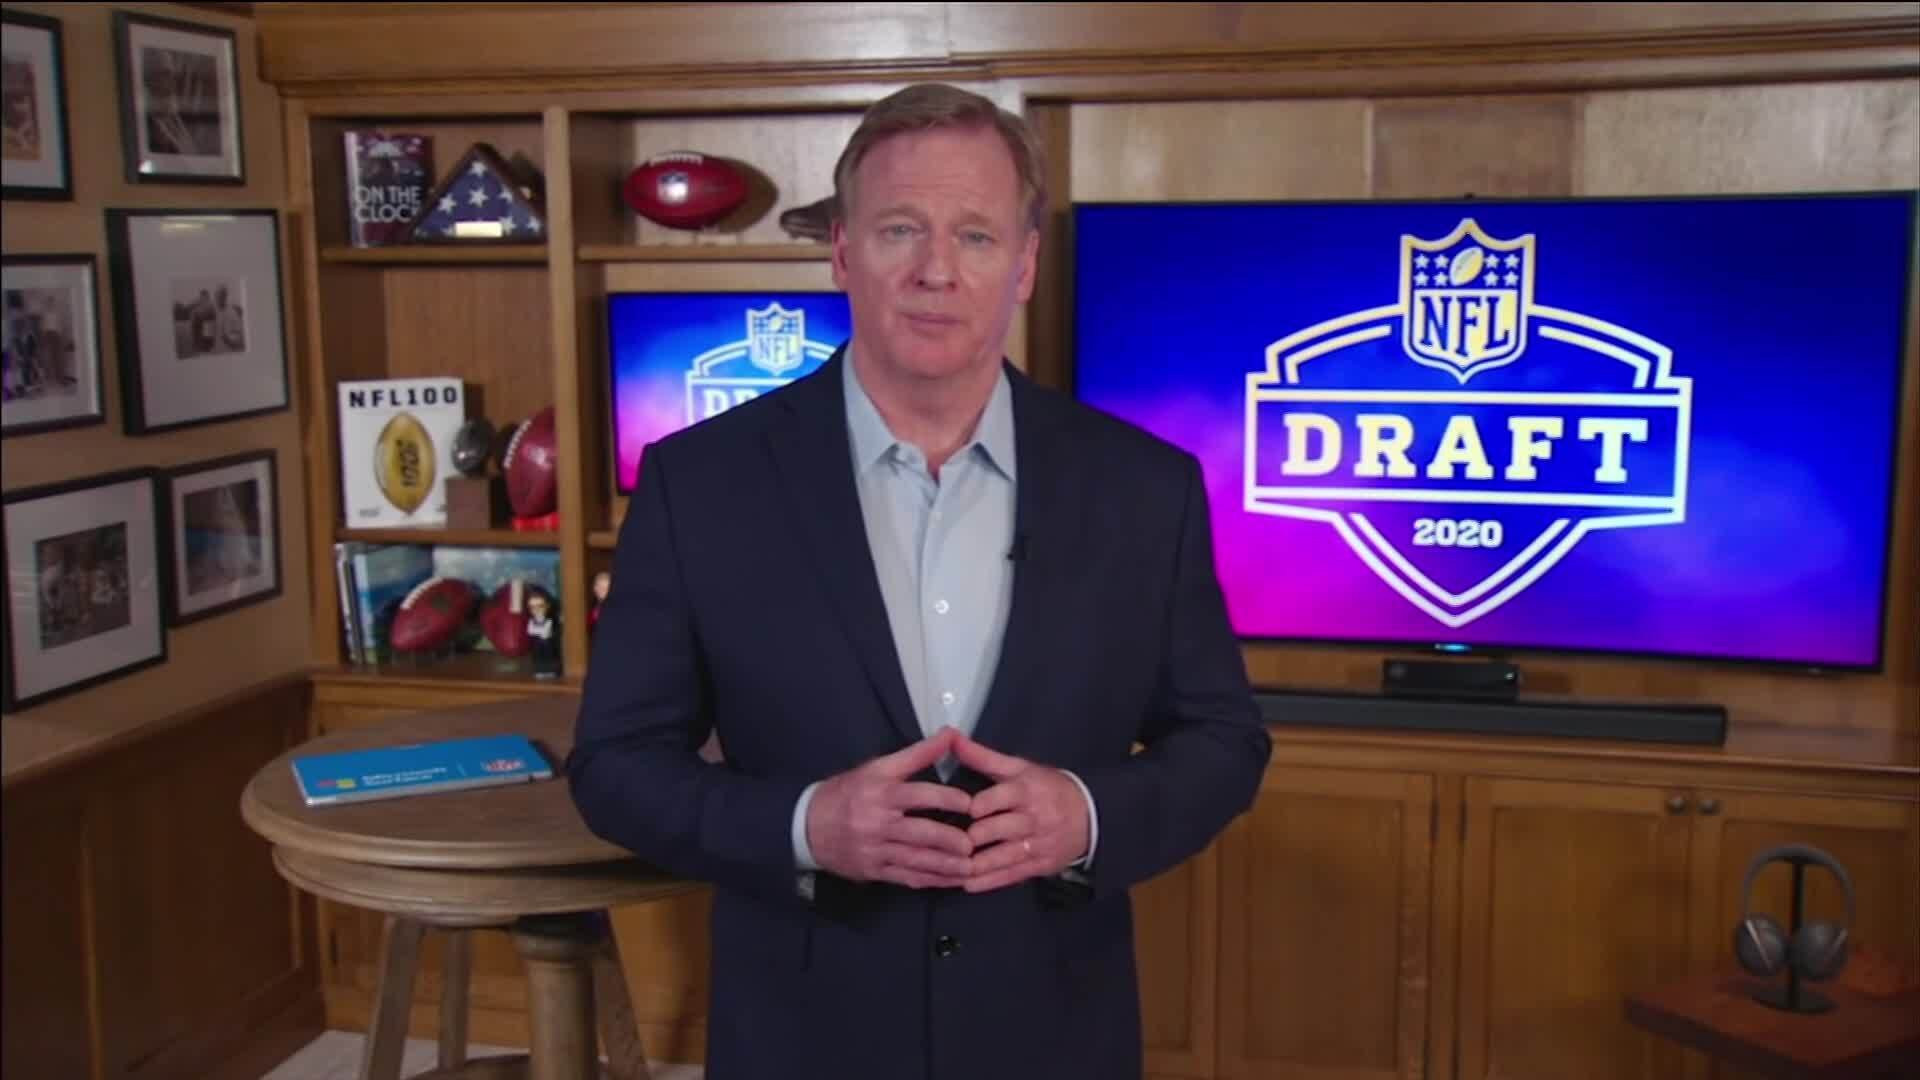 NFL Draft breaks viewing records as it is held remotely